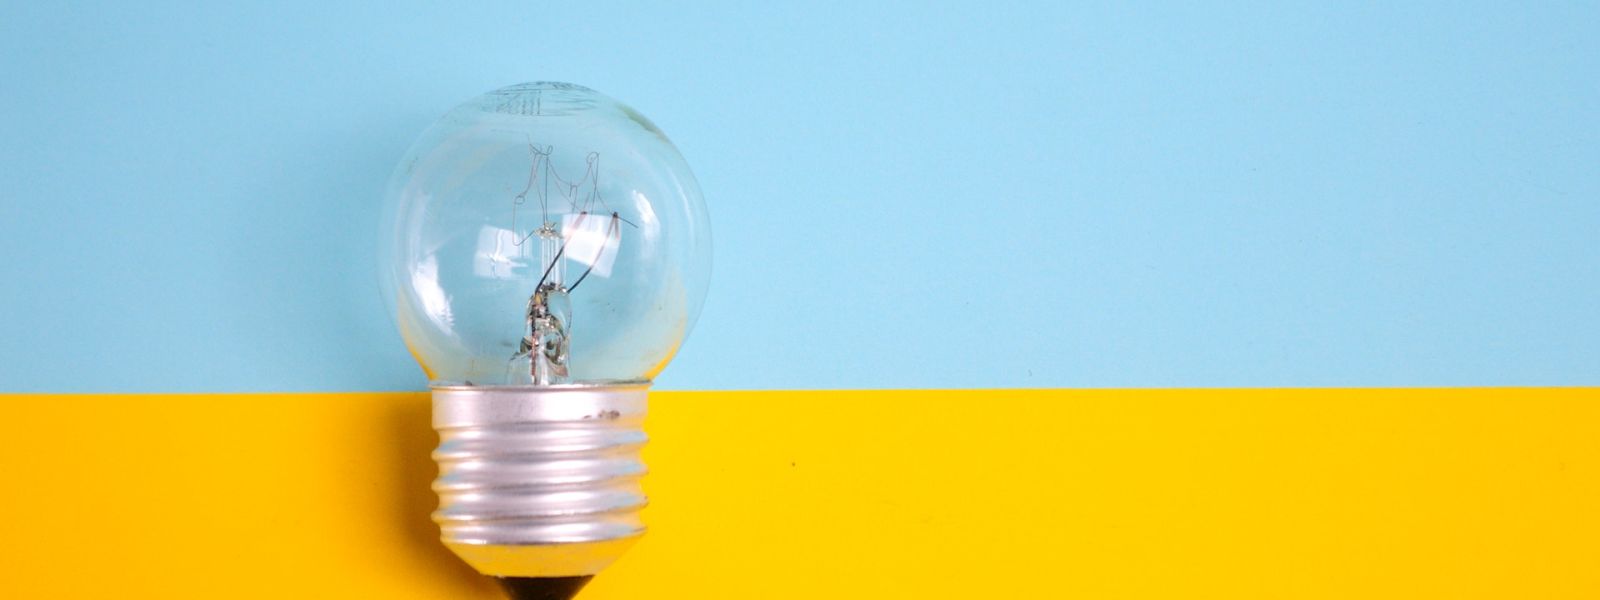 A light bulb in front of a wall that is painted light blue on the top and bright yellow on the bottom.